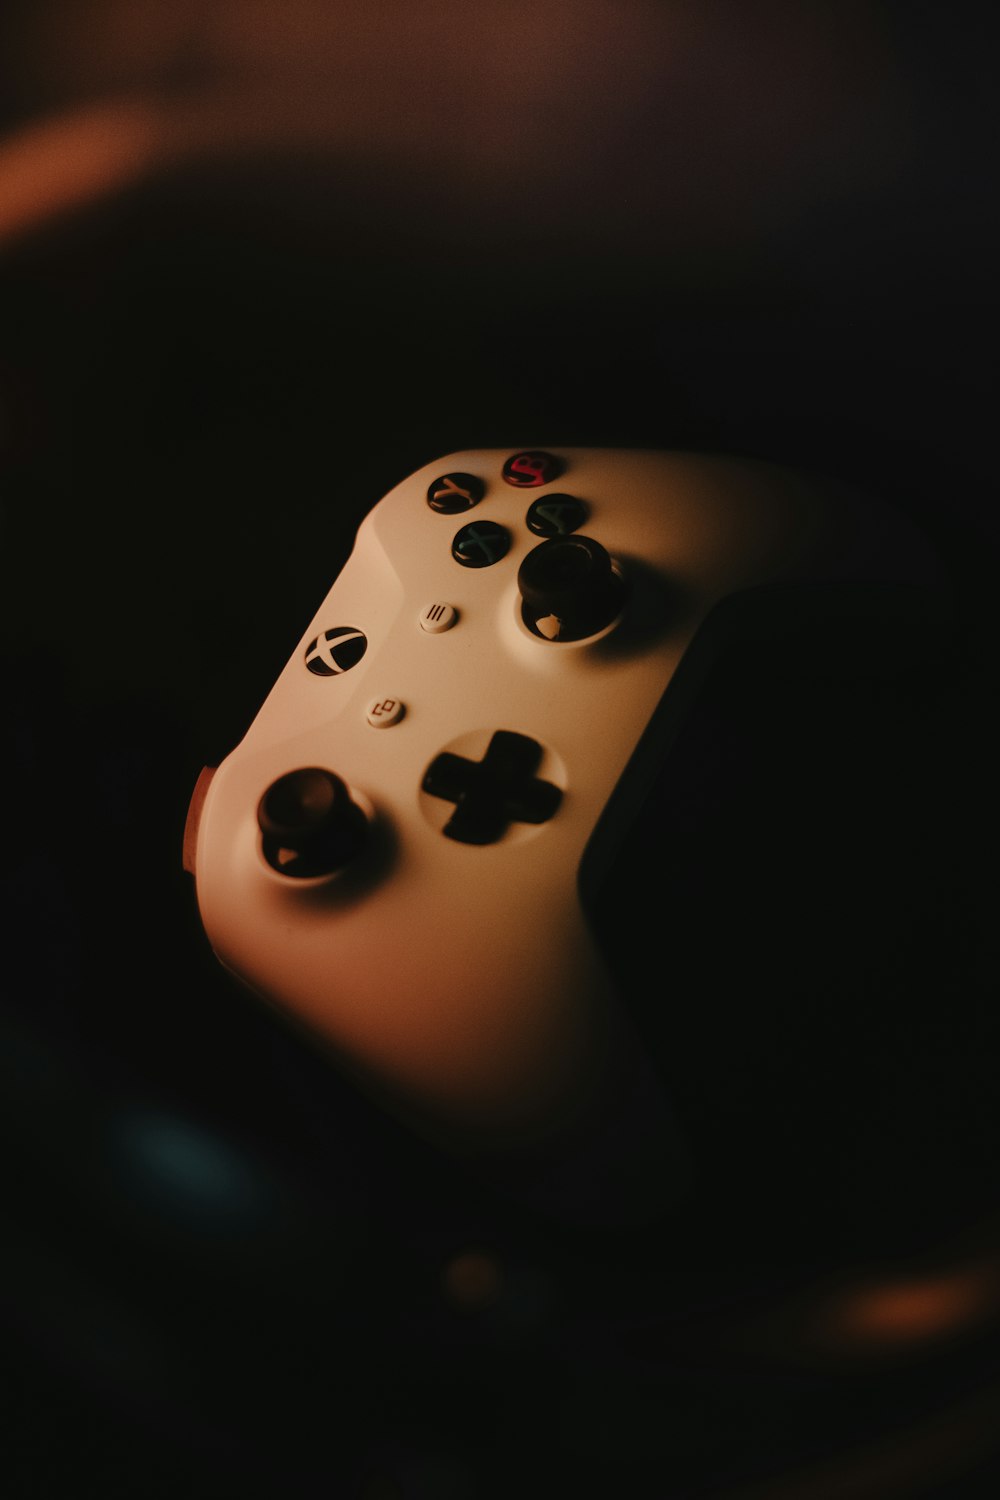 a white and black game controller